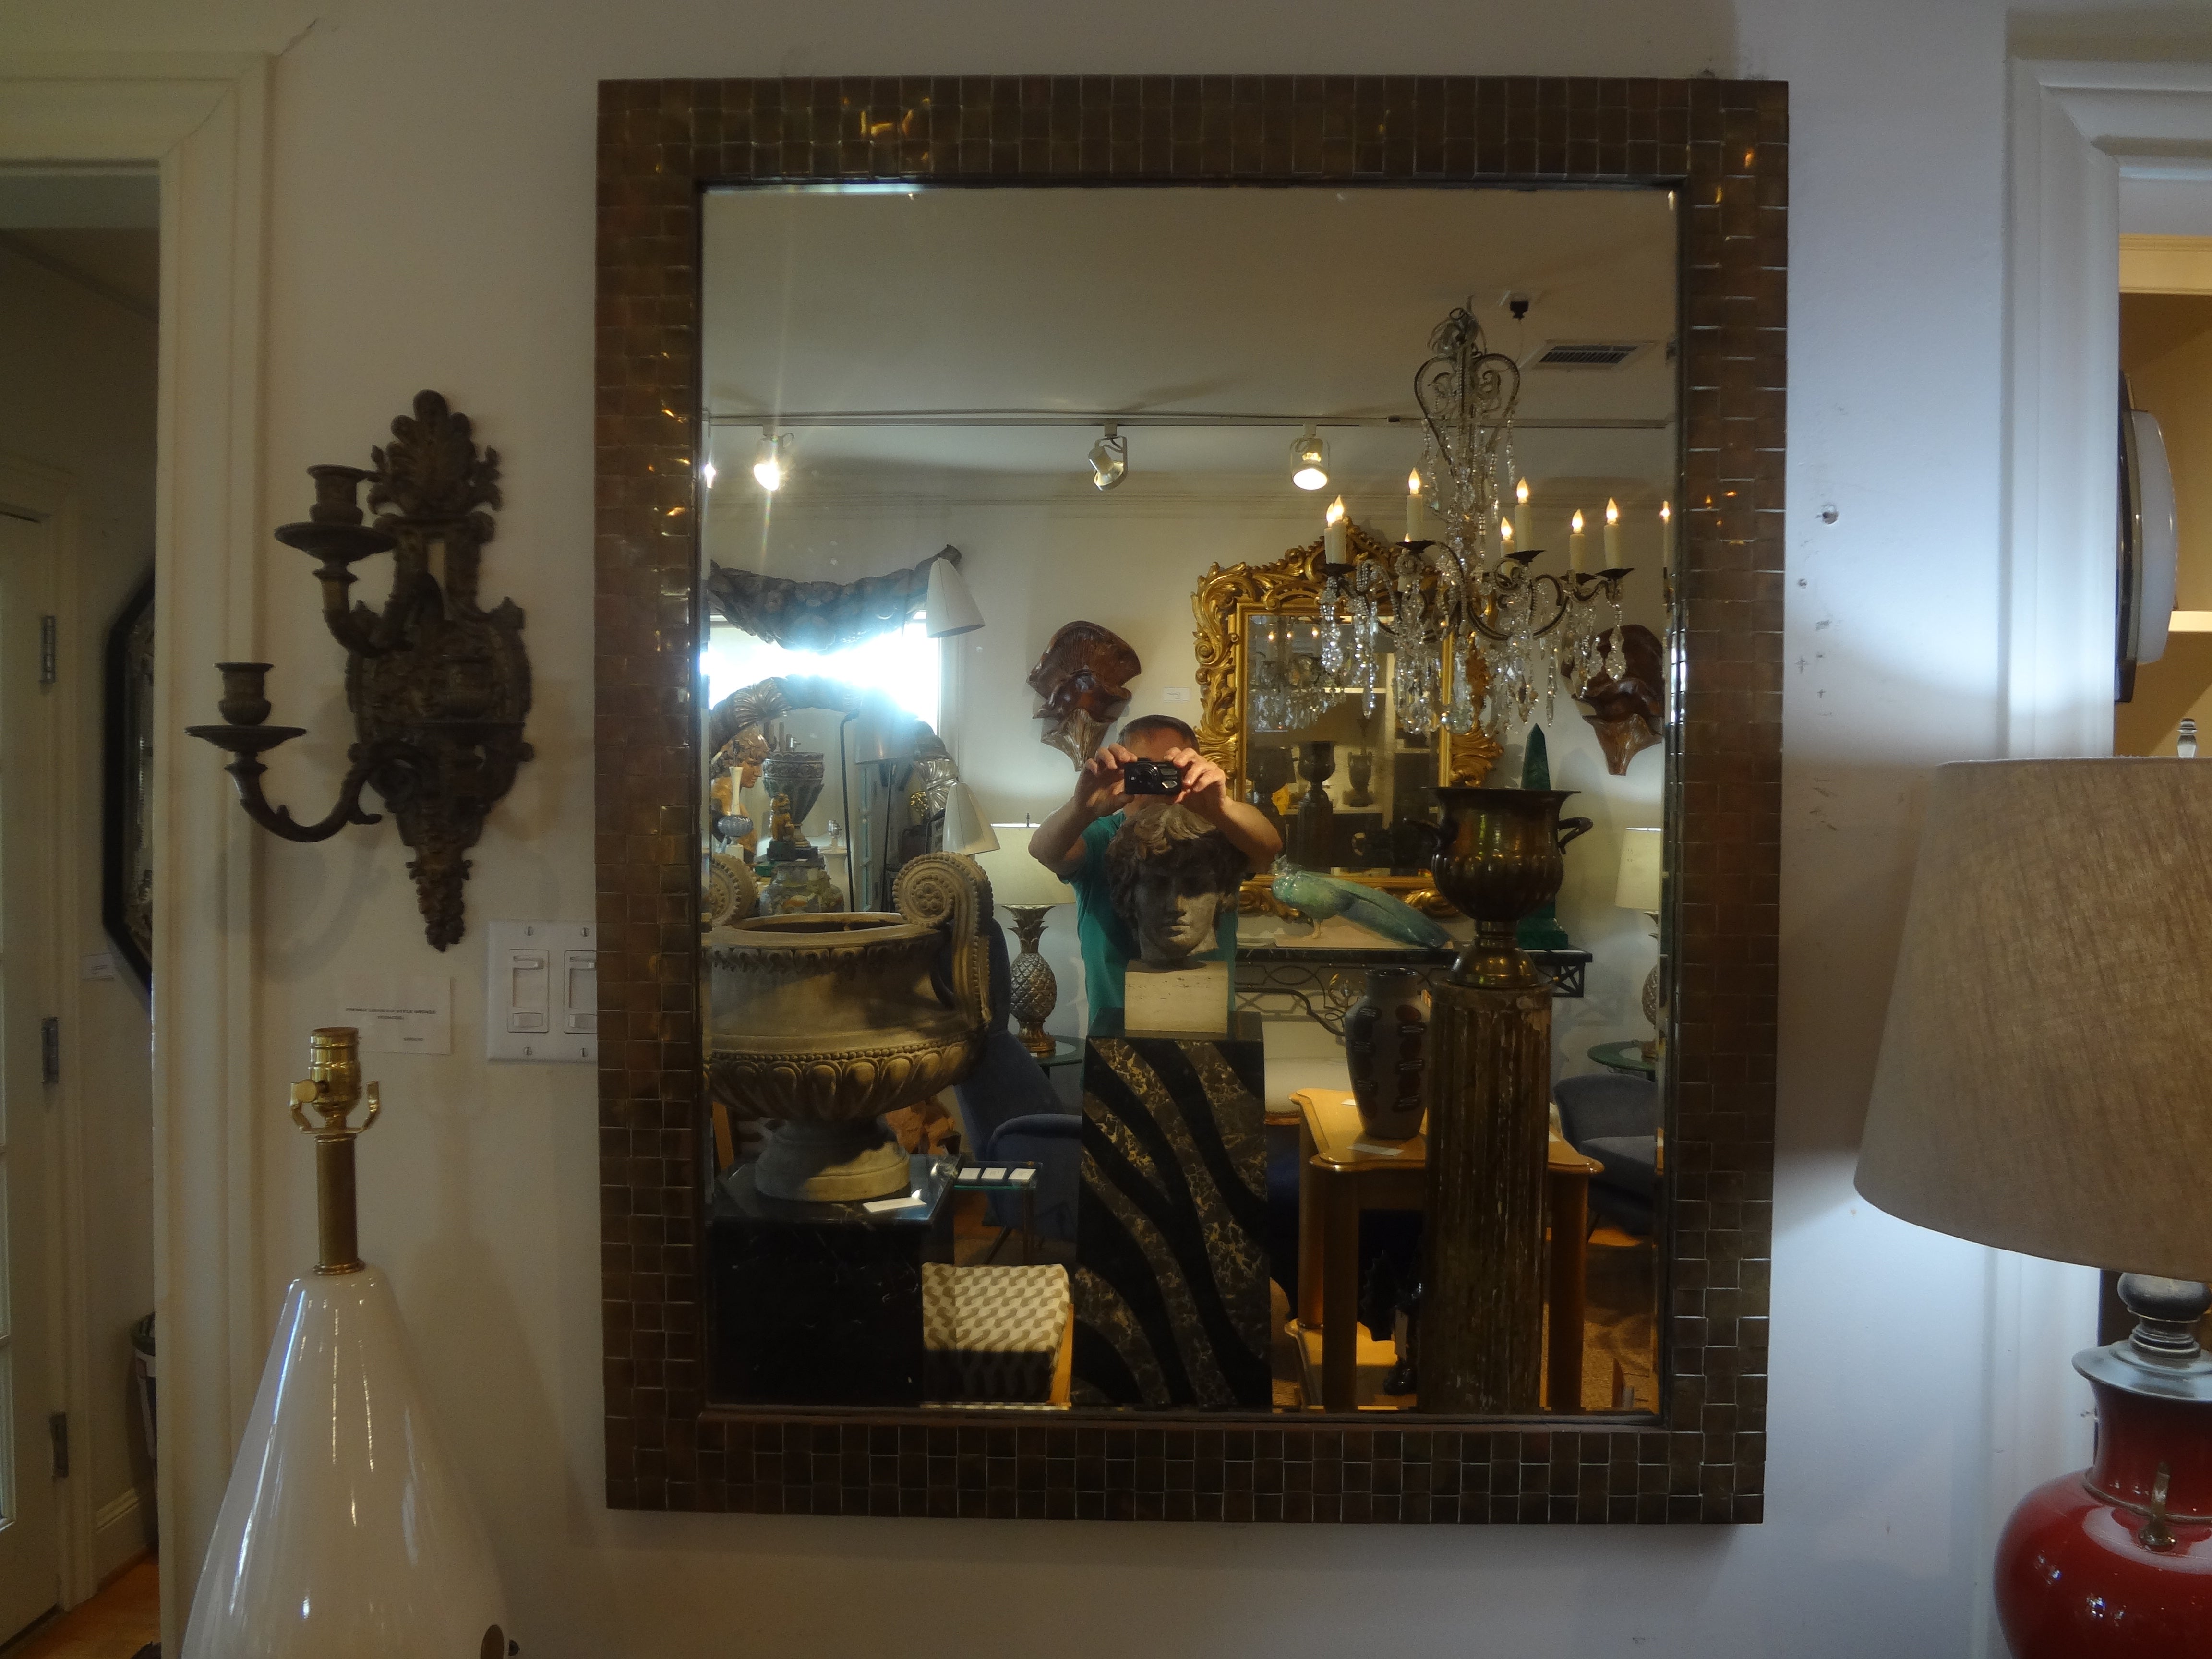 Italian Woven Brass Beveled Mirror.
Beautifully designed Italian woven brass mirror, circa. 1970.
This versatile Italian brass mirror would work in many rooms and interiors.
This stunning mirror can be displayed either vertically or horizontally.